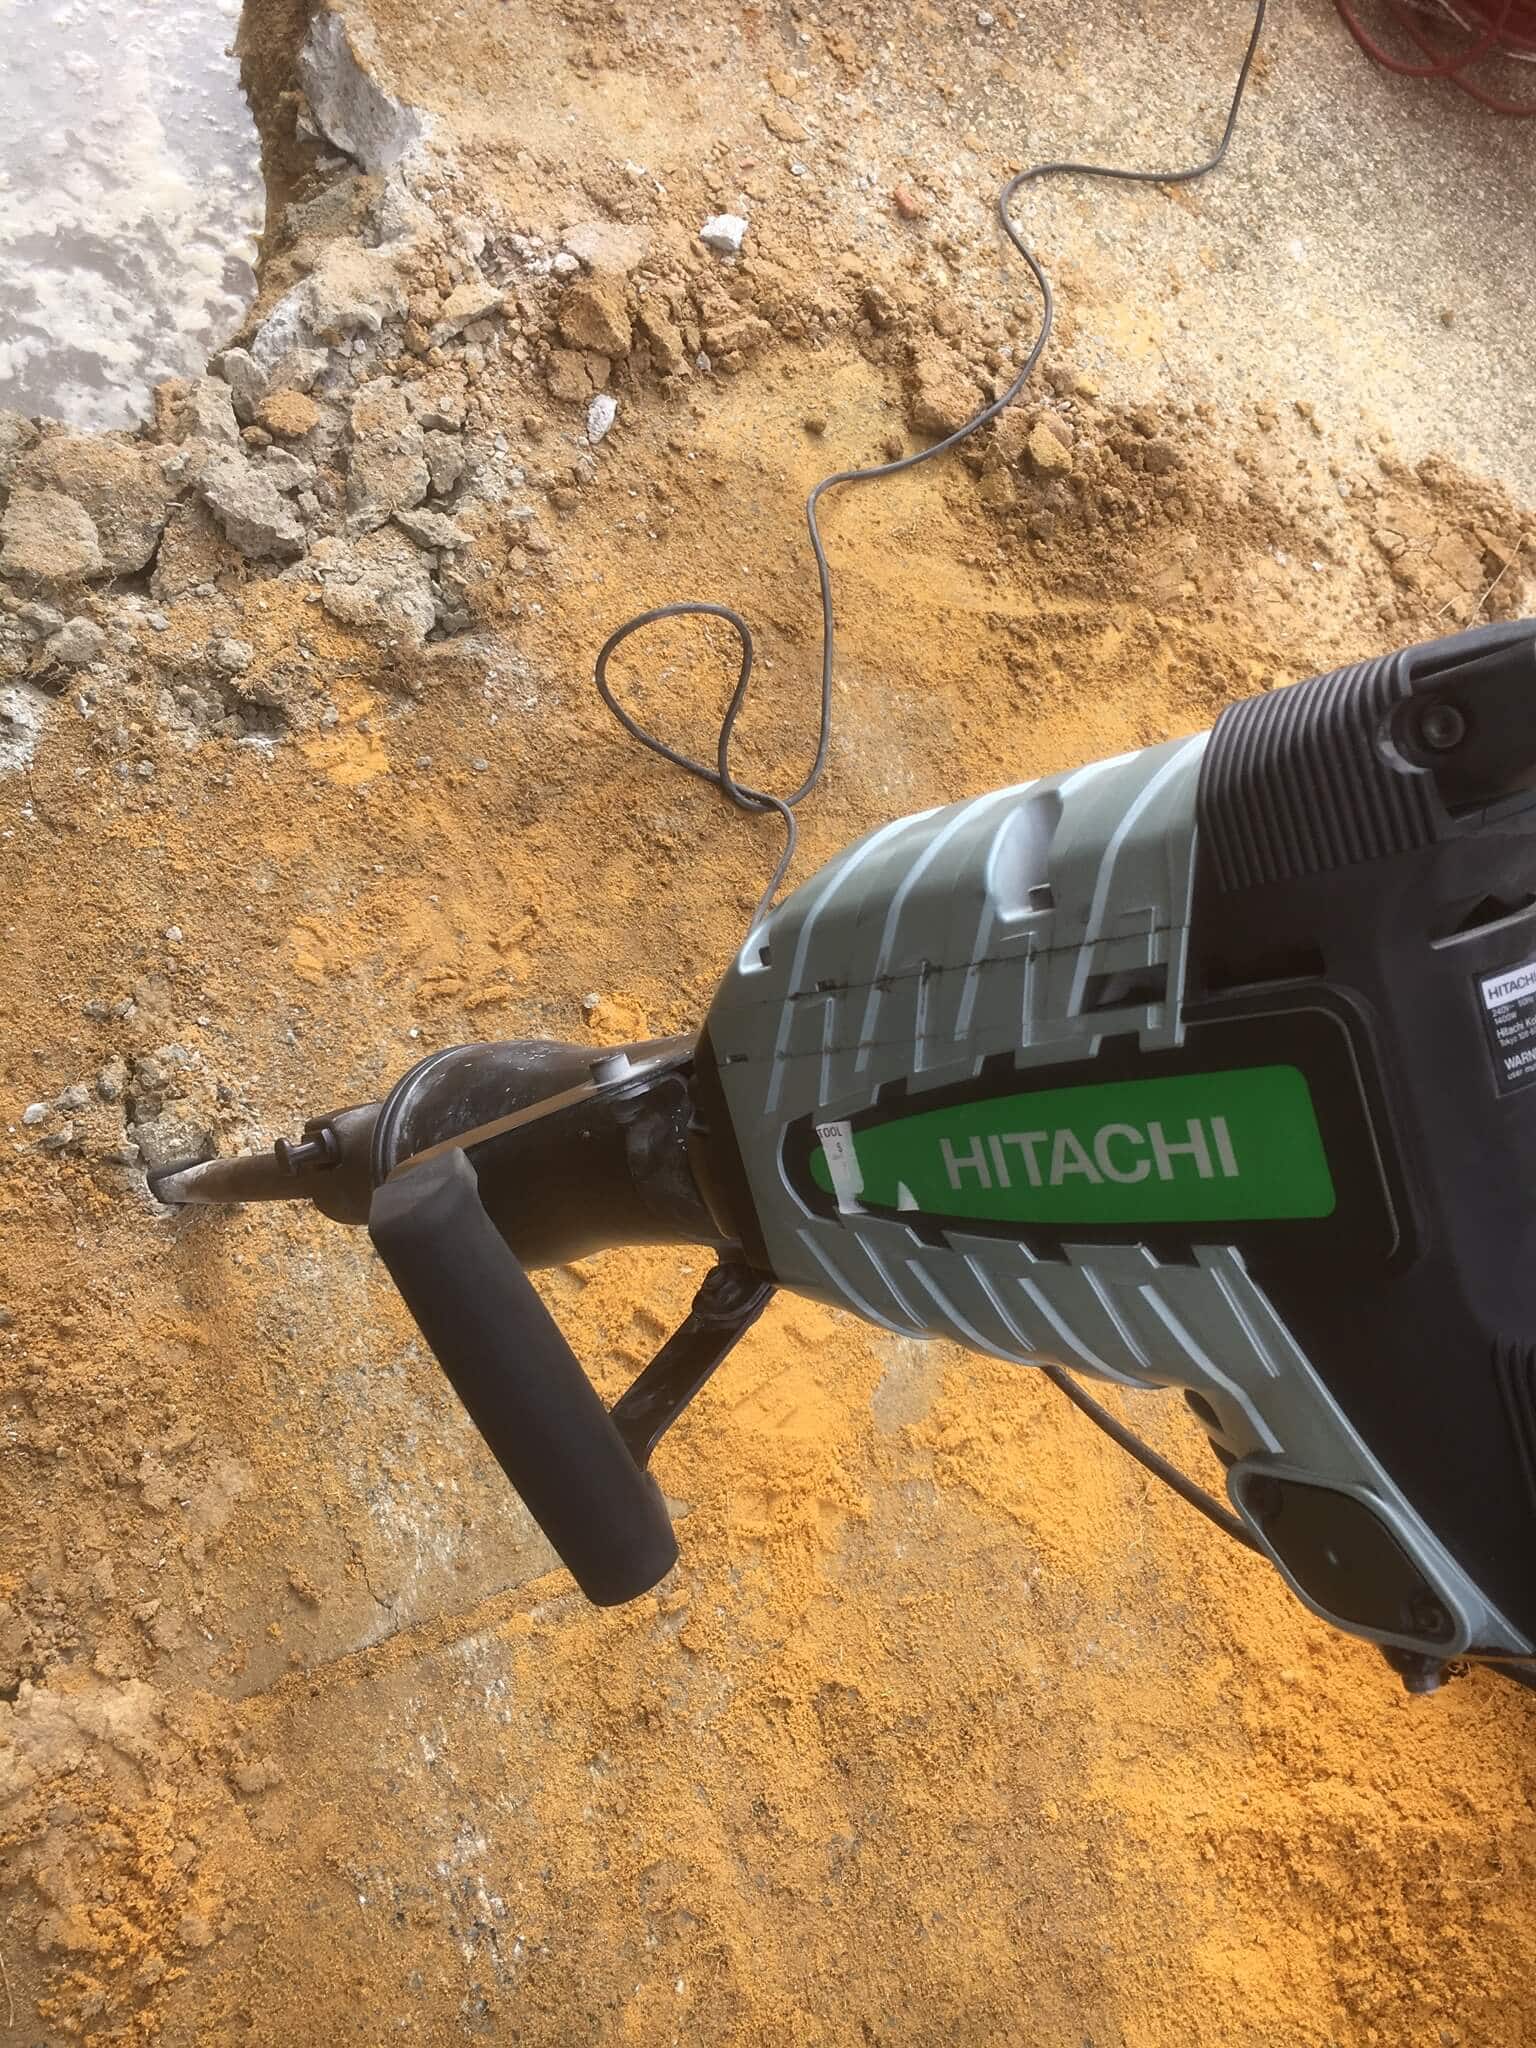 Everyday Plumbers Residential Locating Burst Pipes - Digging with Jackhammer 2029